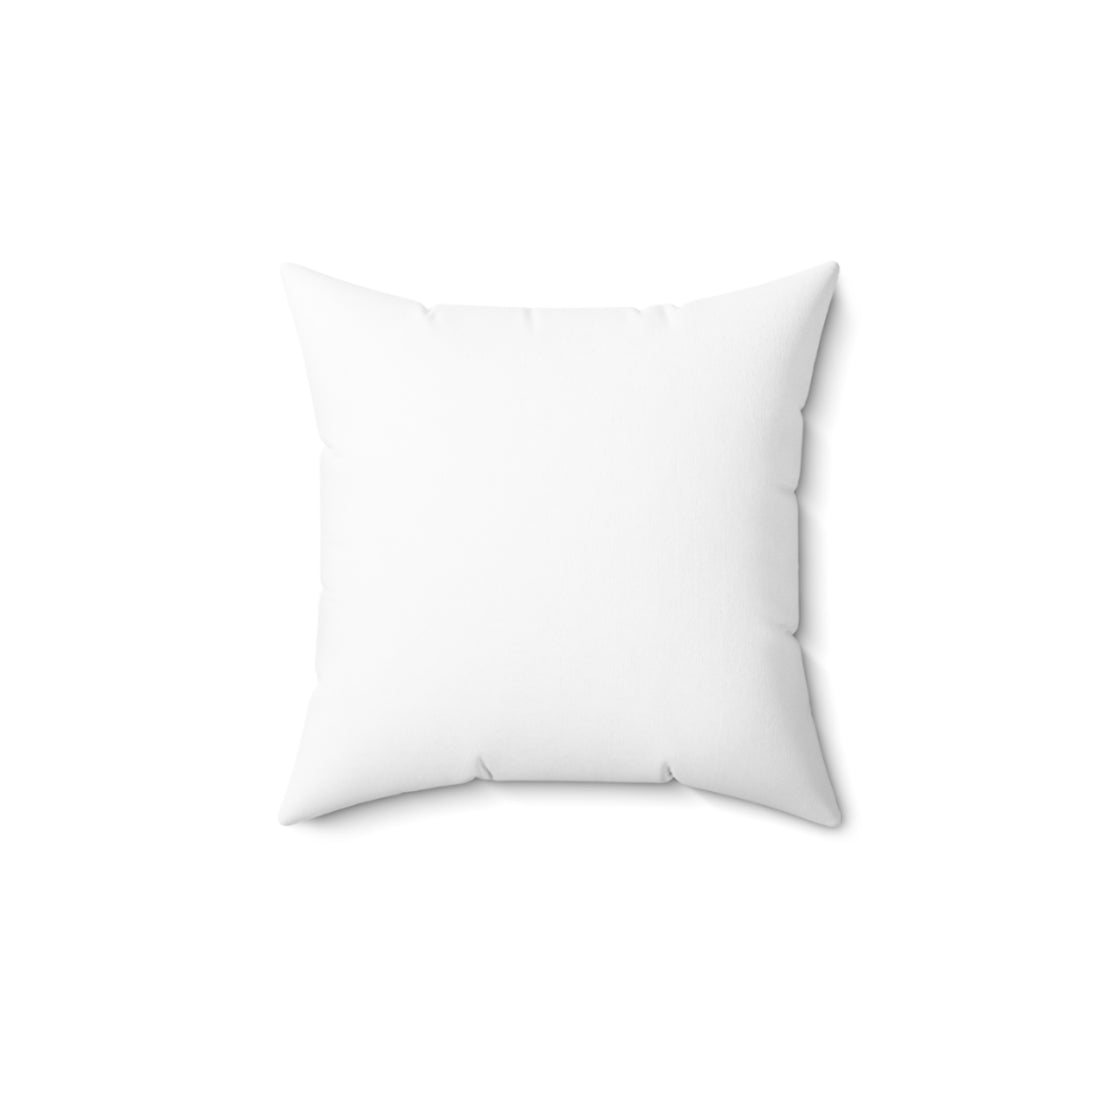 Find God. Polyester Square Pillow